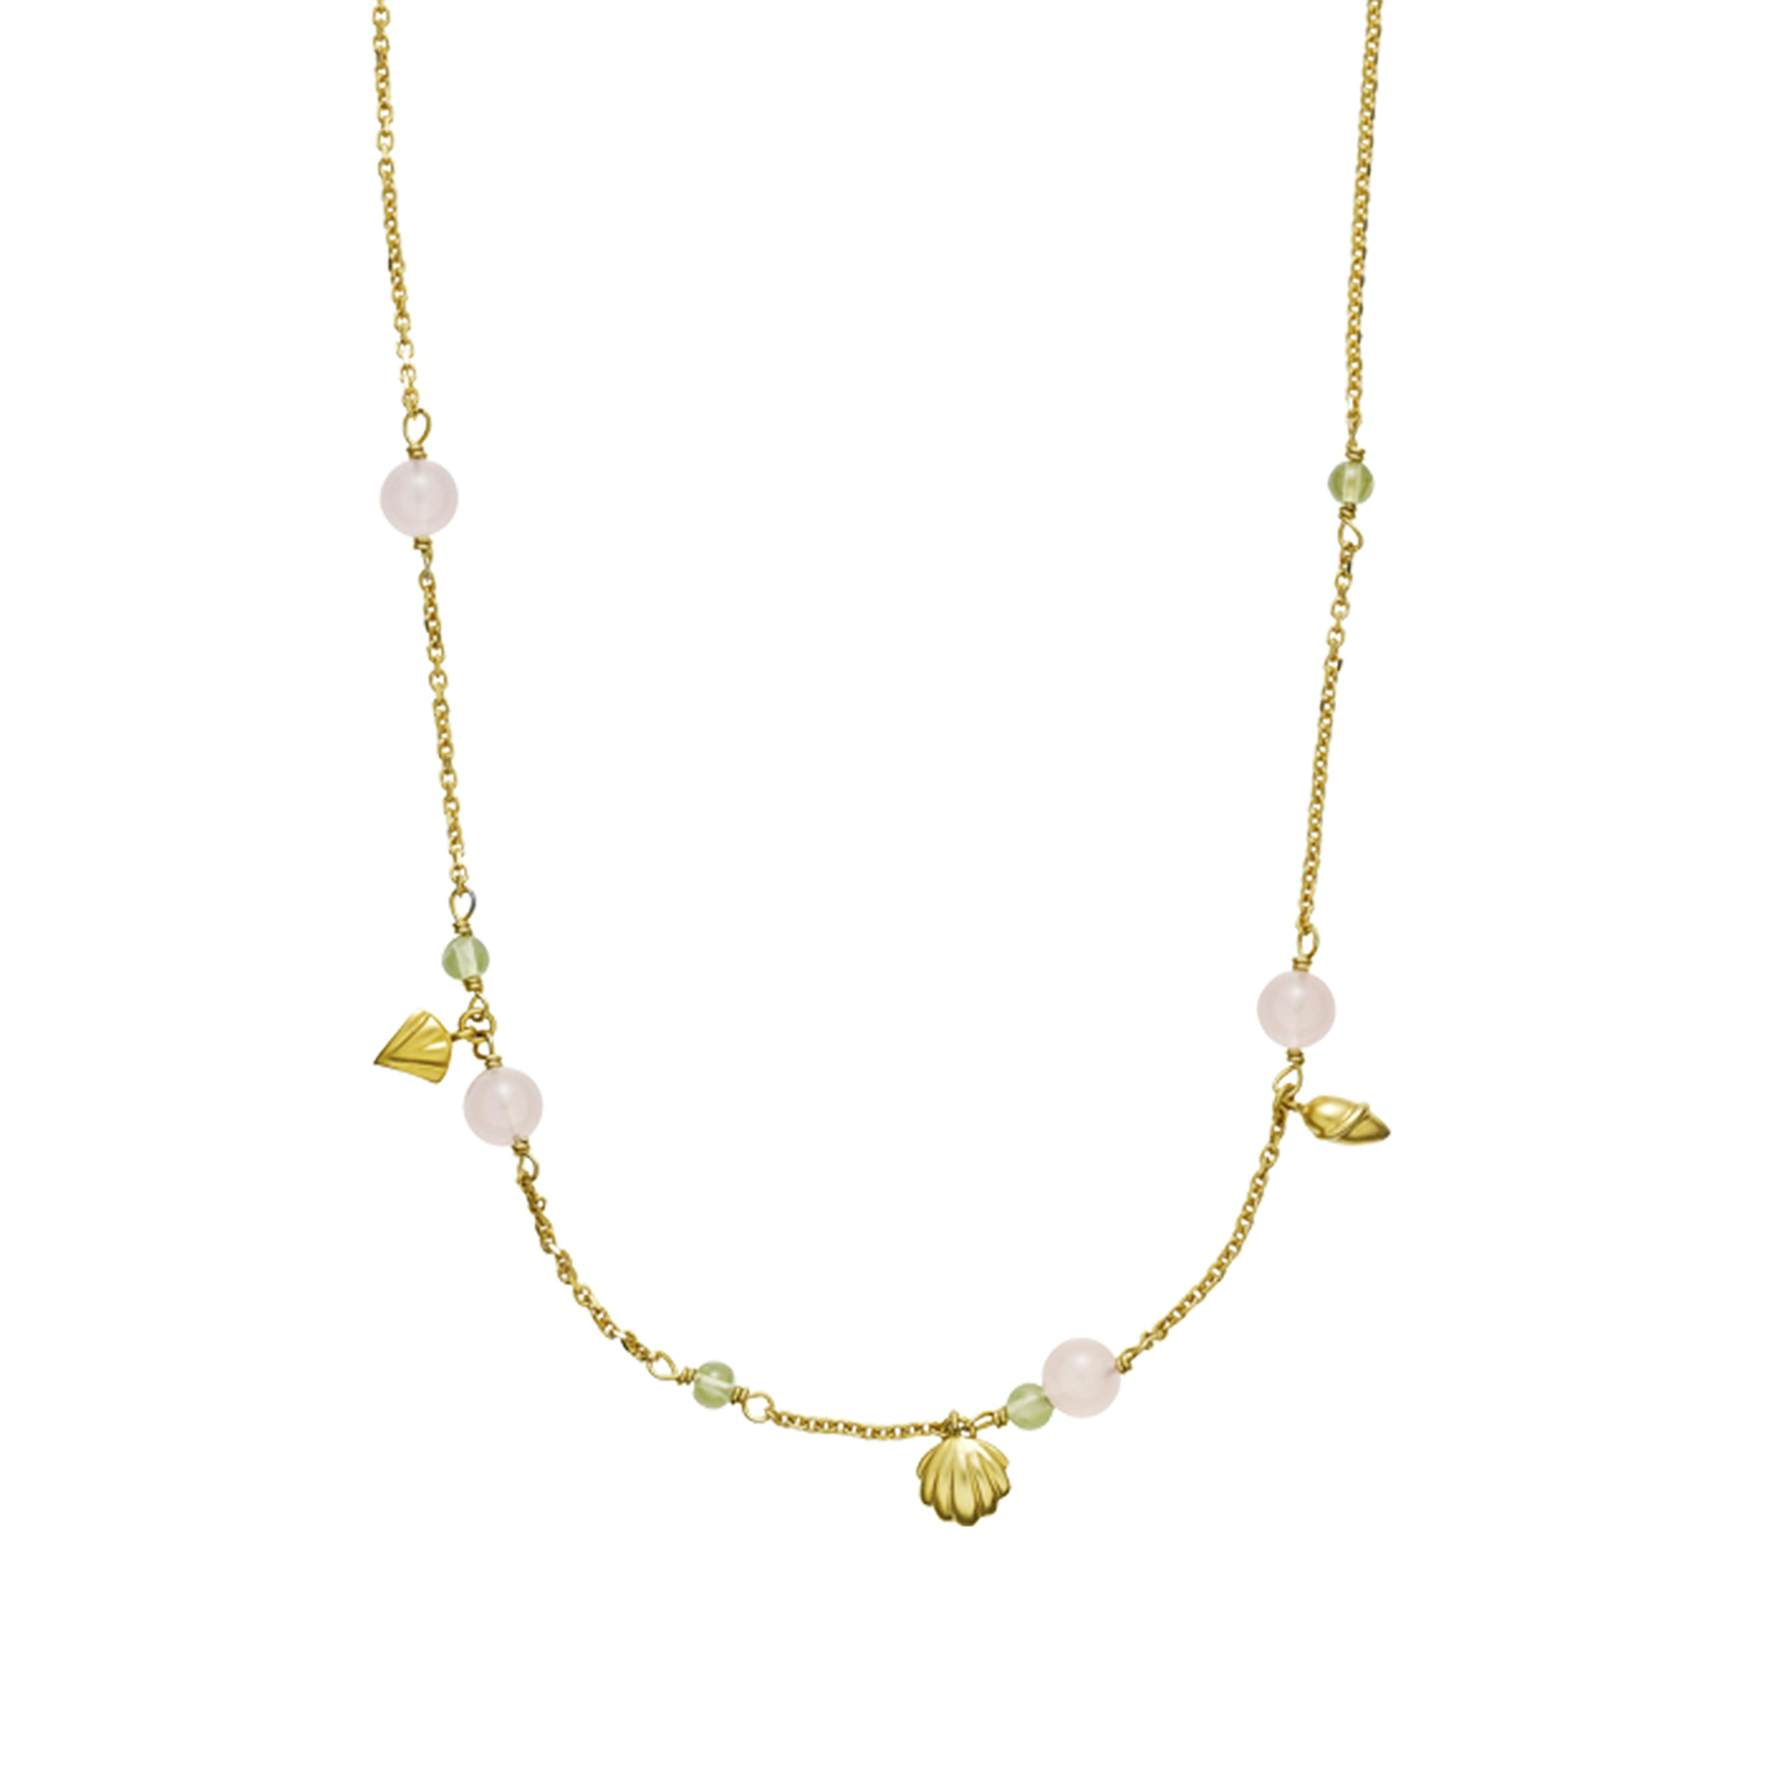 Isabella Pink/Green Necklace